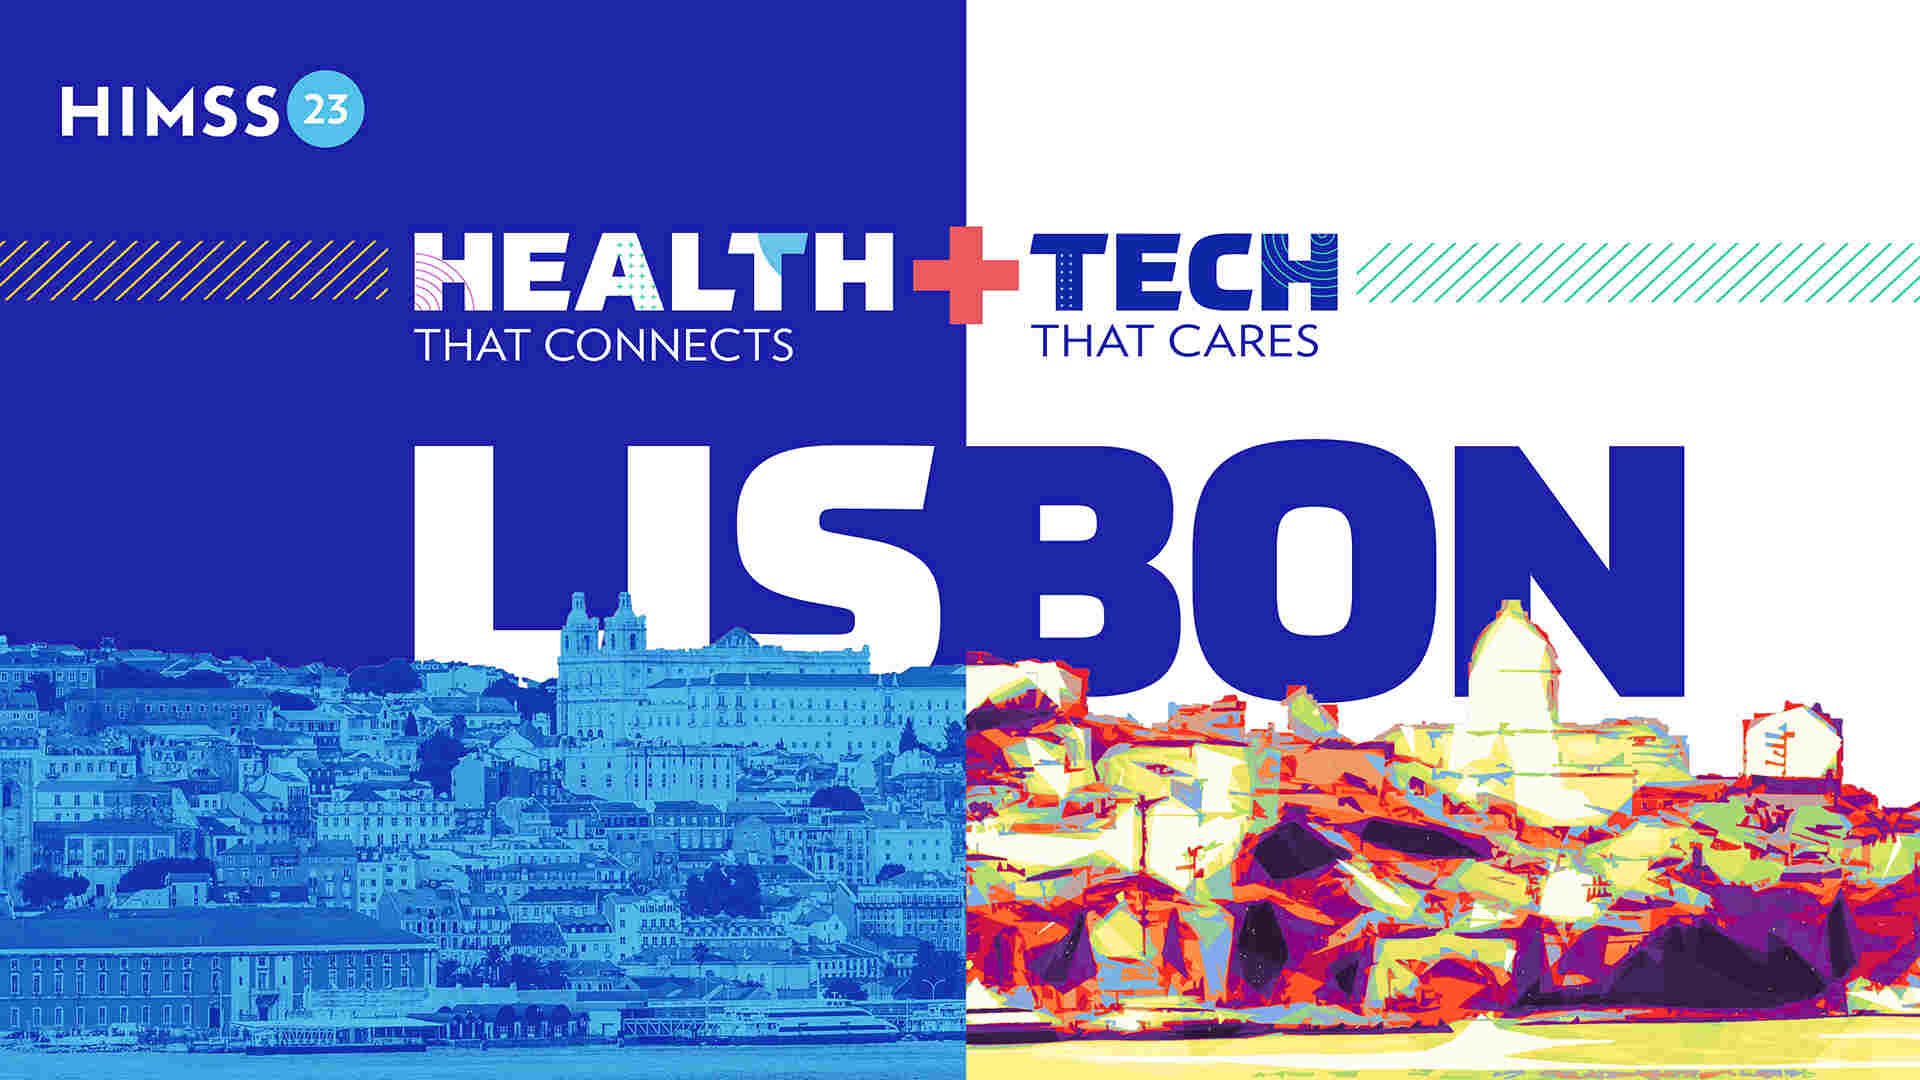 HIMSS23 European Health Conference & Exhibition